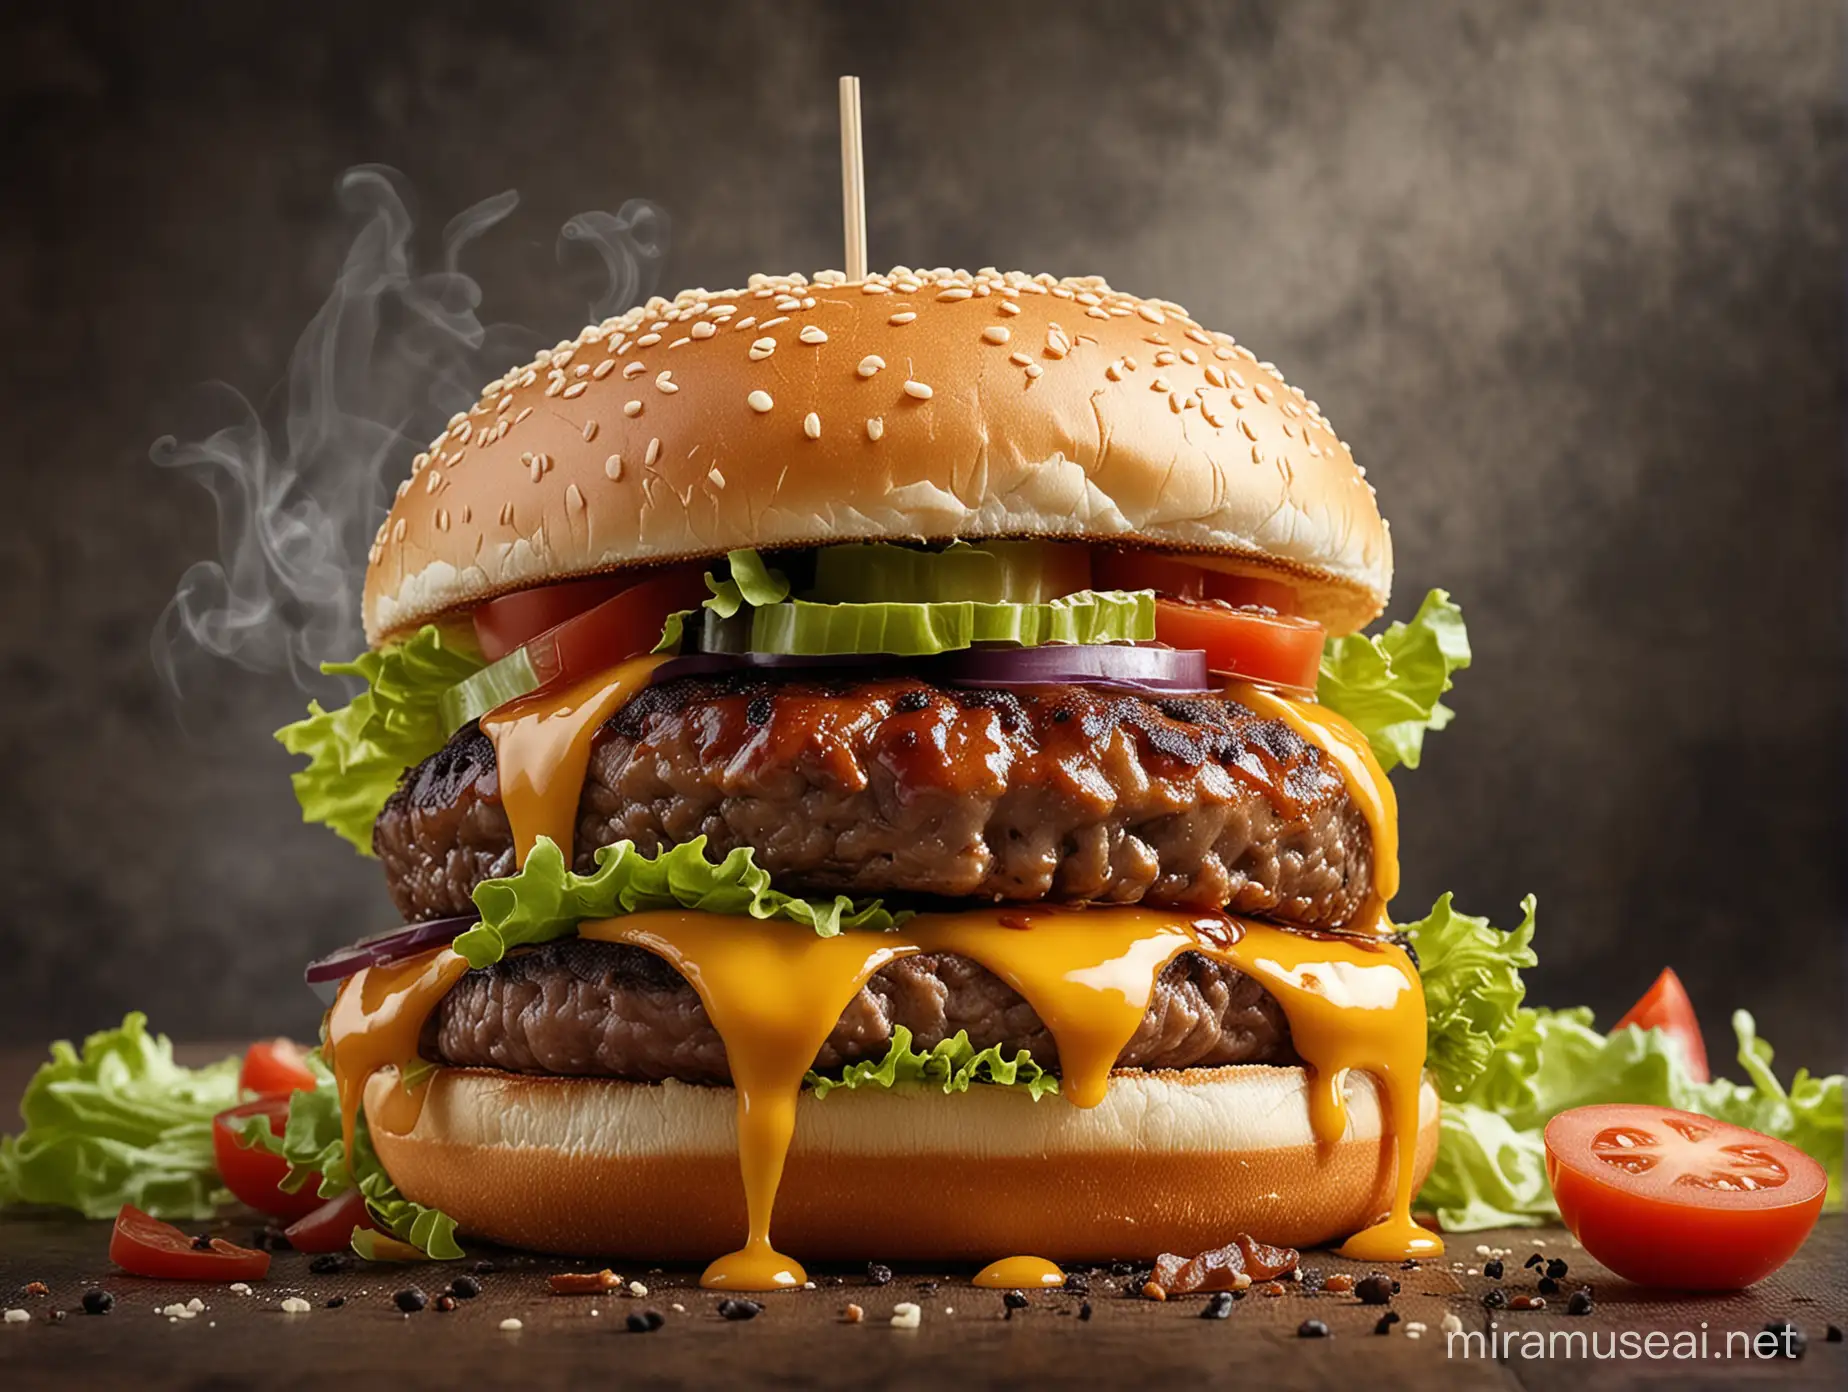 color photo of a delicious hamburger isolated on a mouthwatering background that showcases its delectable allure. The hamburger takes center stage, perfectly cooked and stacked with juicy meat, melted cheese, crisp lettuce, and fresh tomatoes. The bun is soft and golden, adding a touch of comfort to the composition. The background is designed to enhance the deliciousness of the hamburger, with vibrant colors and textures that evoke an appetite-inducing atmosphere. Perhaps there are hints of condiments, such as ketchup or mustard, dripping enticingly down the sides. This composition immerses viewers in the irresistible temptation of a mouthwatering hamburger, inviting them to savor the flavors, textures, and sheer satisfaction that comes with every bite. It is a visual invitation to indulge in the pleasure of a well-crafted burger, to satisfy cravings, and to celebrate the simple joy of enjoying a delicious meal.